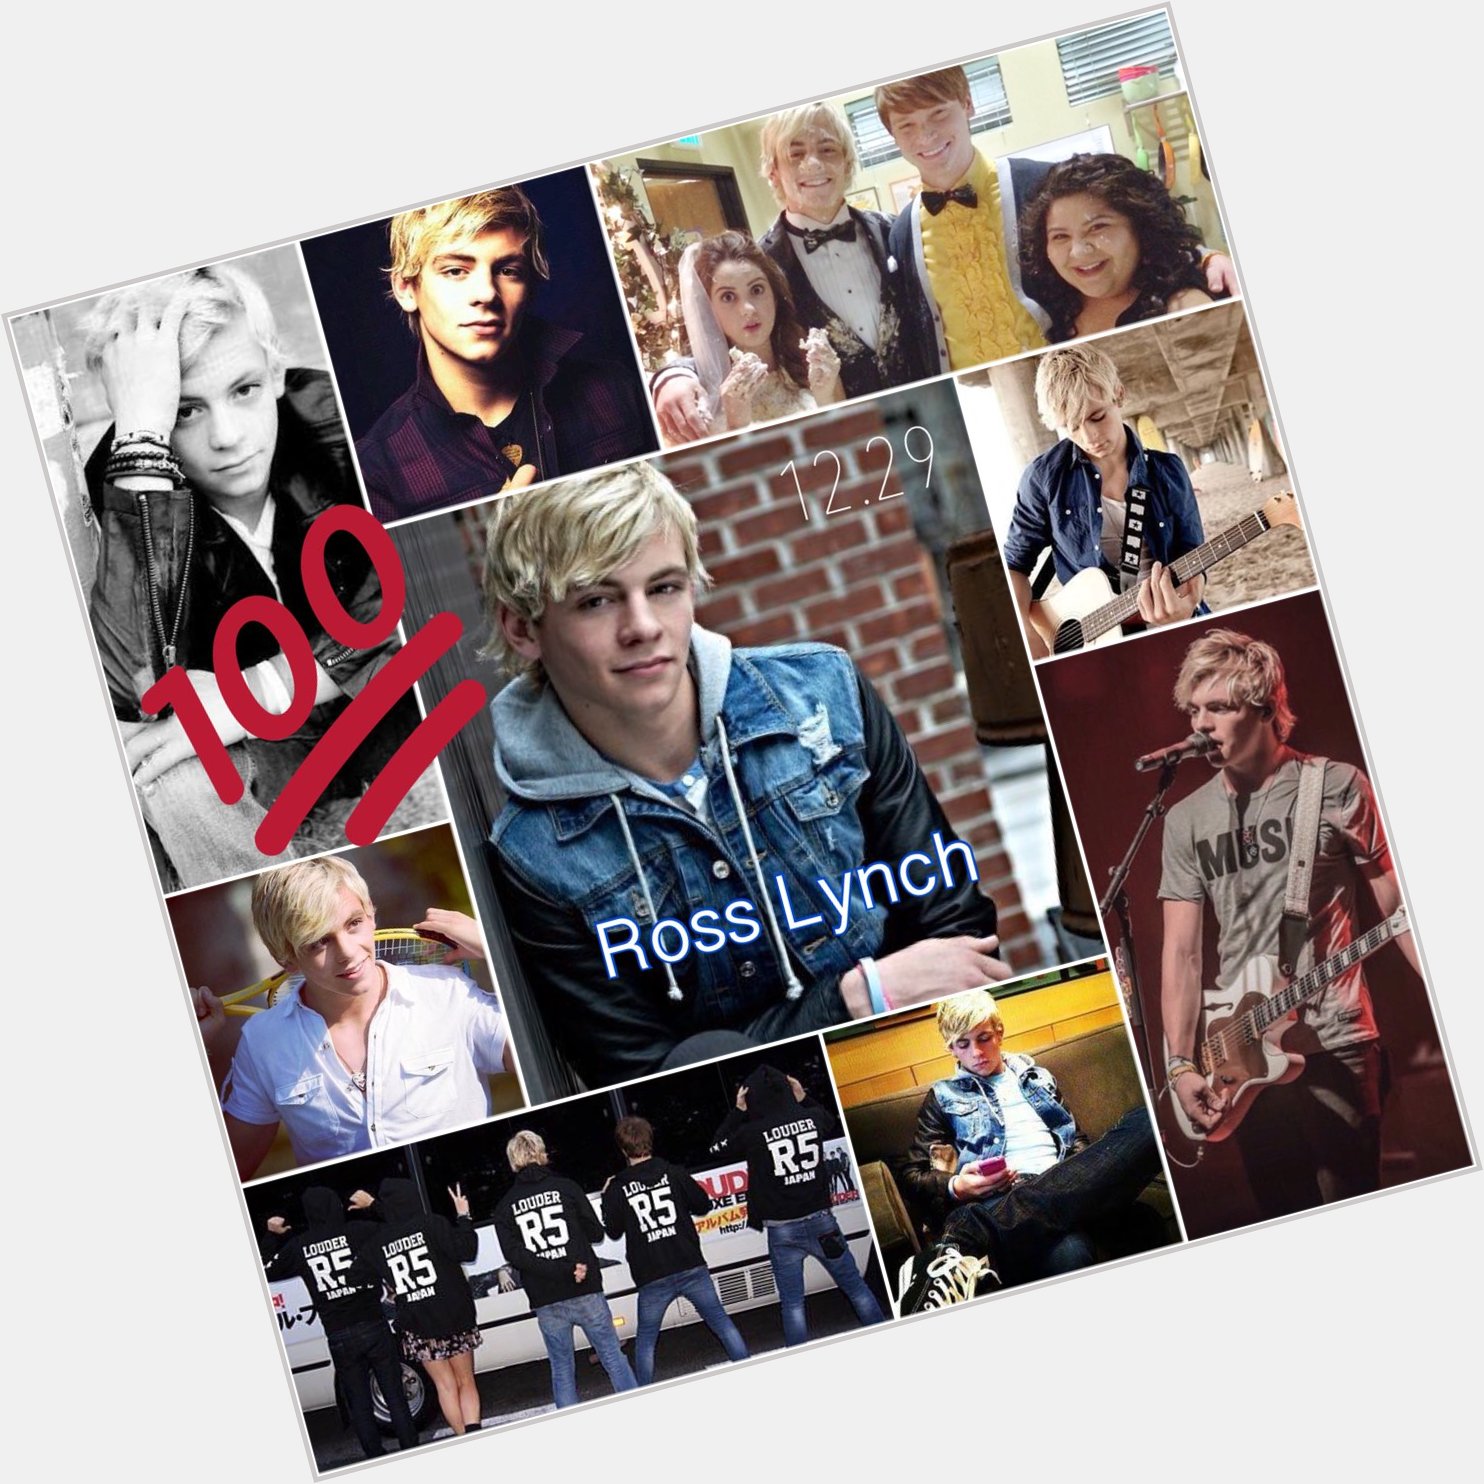  Ross Lynch Happy Birthday I LOVE YOU SO MUCH I WANT TO MEET YOU  from Japanese fan  